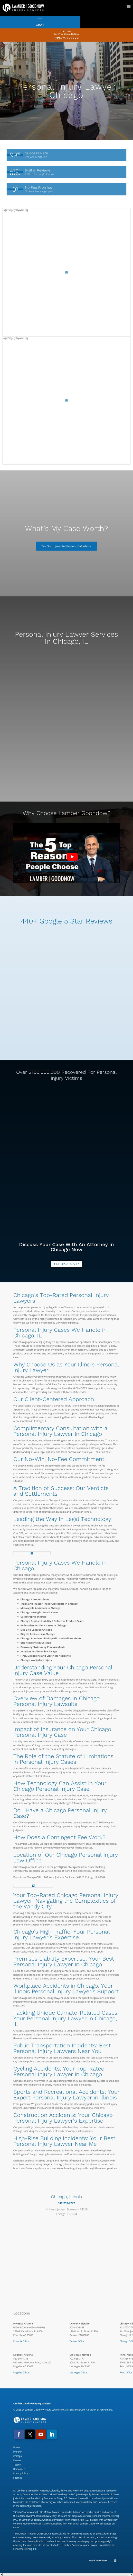 Lamber Goodnow - Chicago IL Lawyers